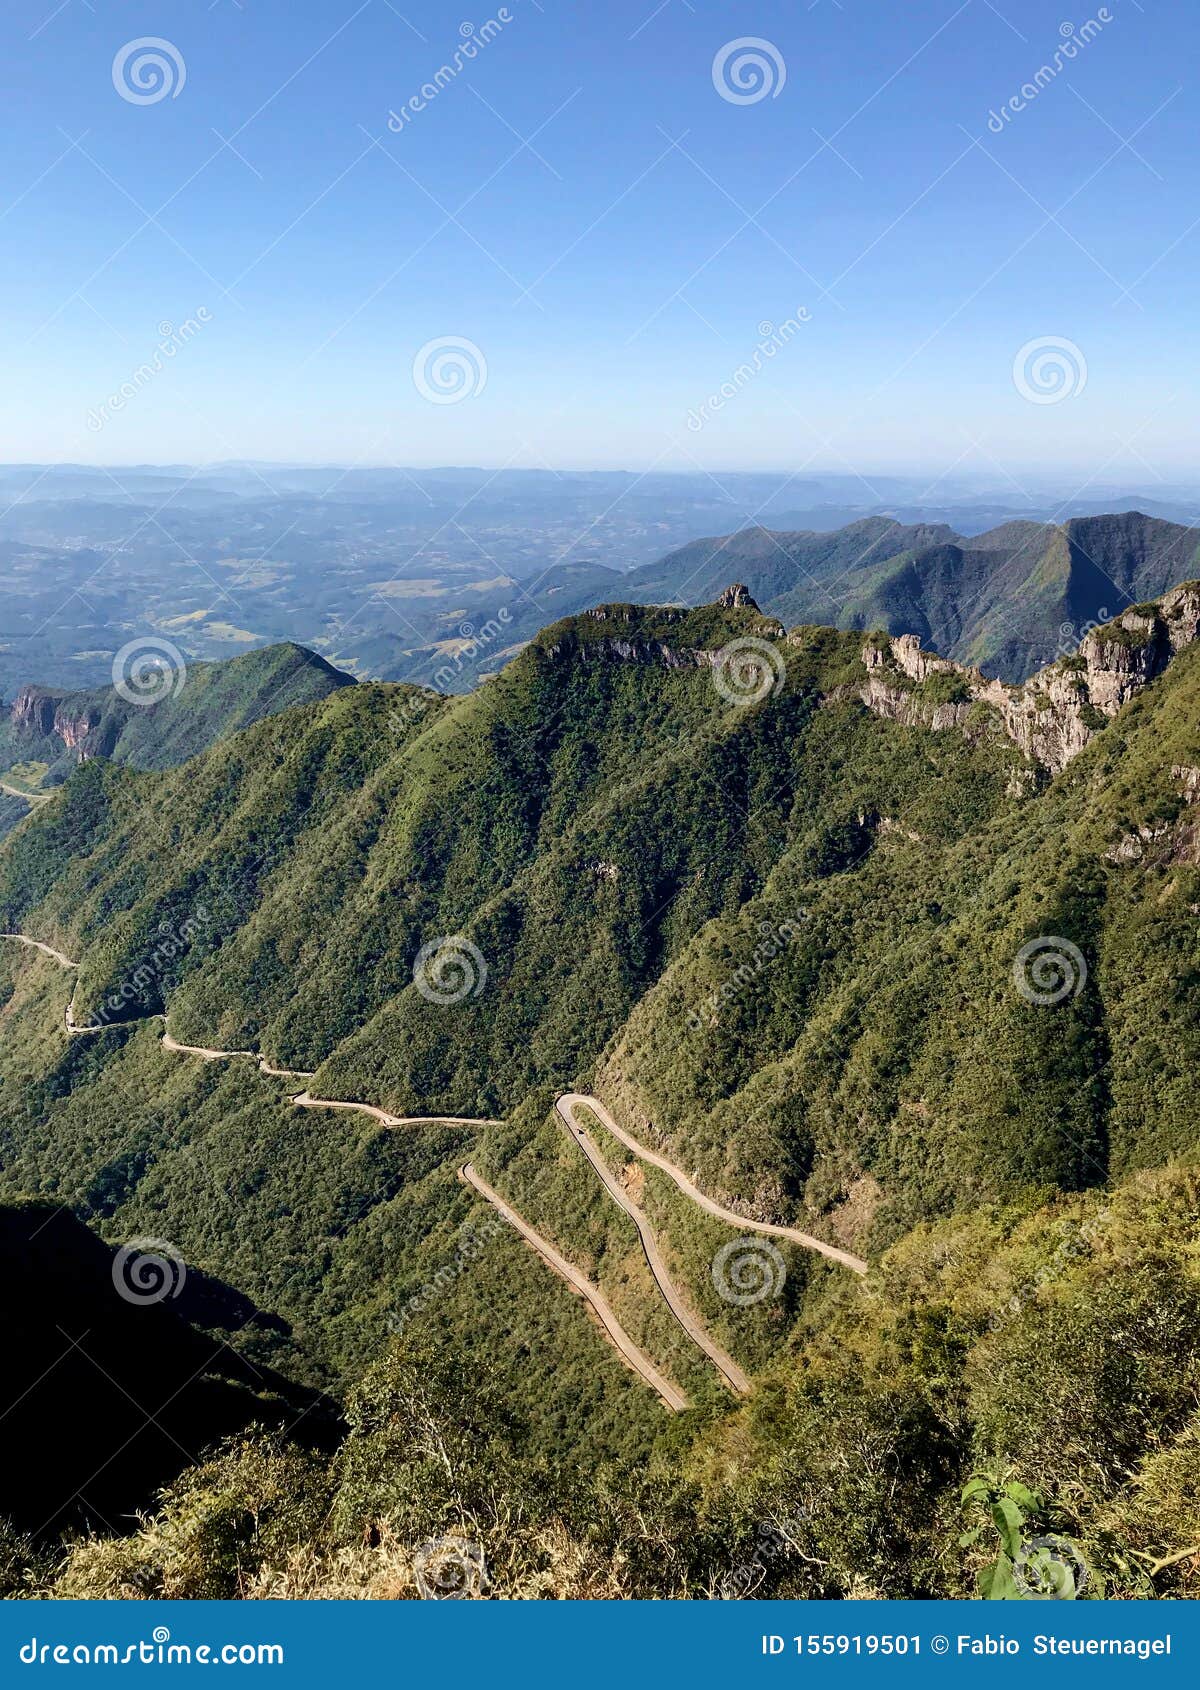 panoramic view of the roads and mountains of the rio do rastro mountain range in lauro mueller